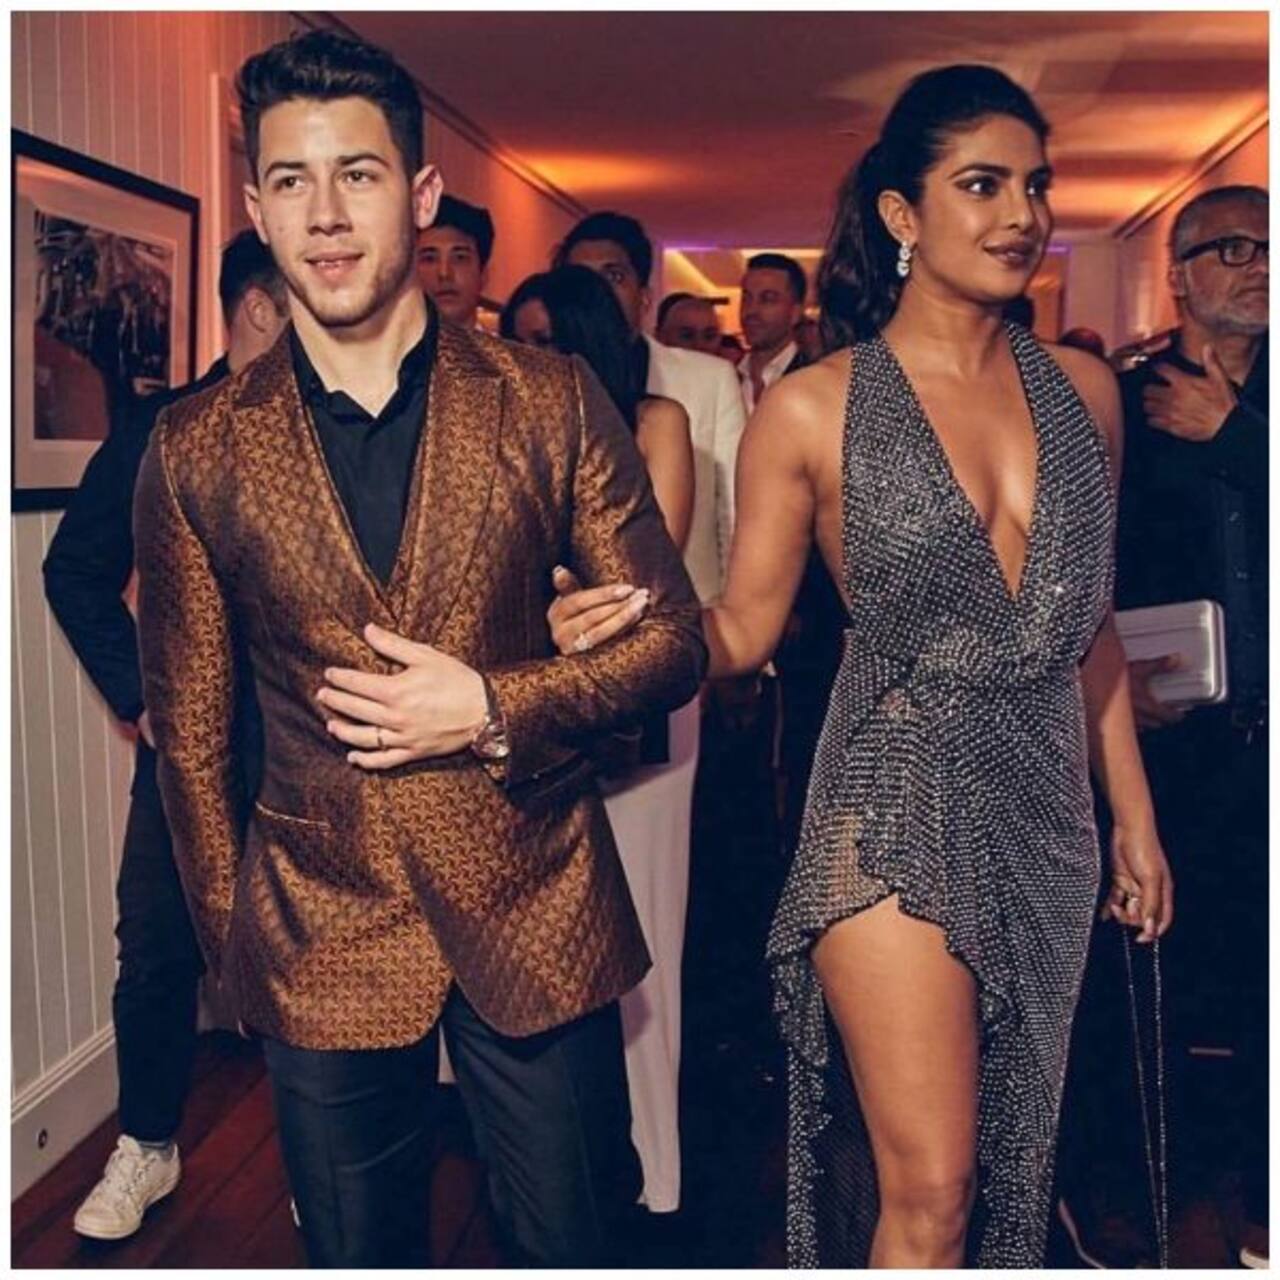 Cannes 2019: Priyanka Chopra's sexy gun metallic gown shows off her toned body and hubby Nick Jonas has the best view - see pics